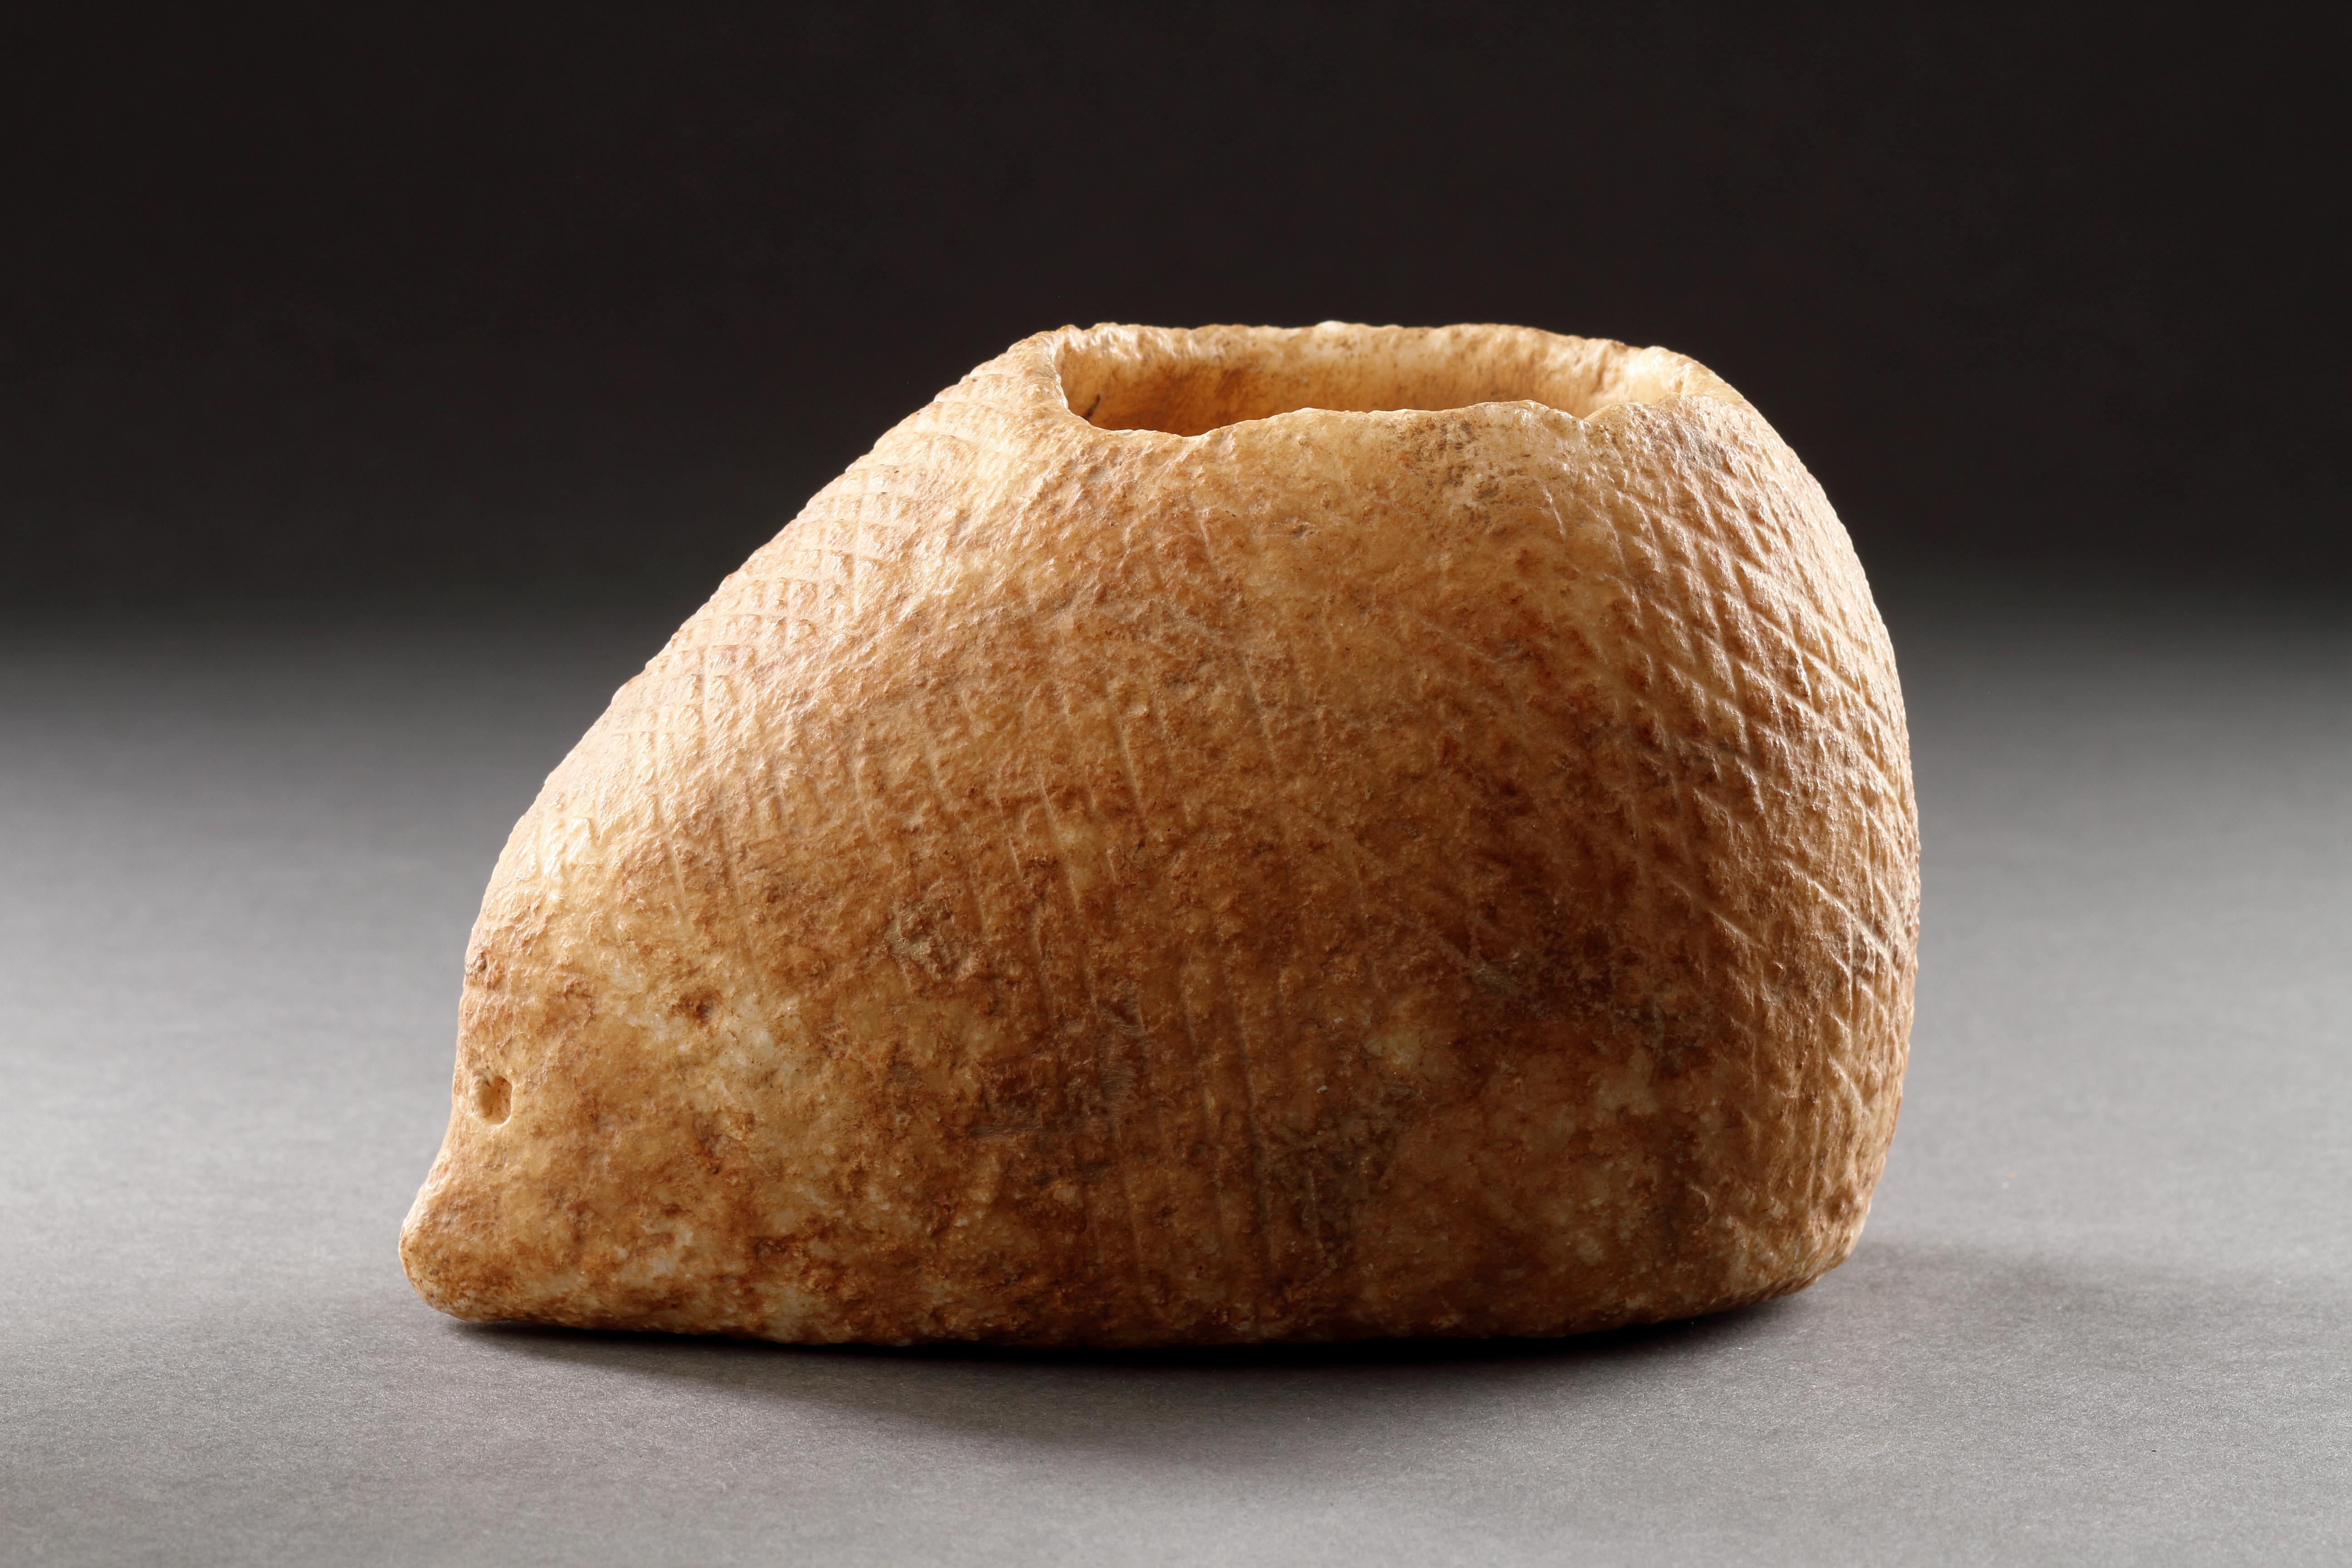 A Very Rare and Early Carved Vessel in the Form of a Hedgehog 
Alabaster
Near Eastern 
3rd Millenium BC 

SIZE: 9.5cm high, 9.5cm wide, 15.5cm deep - 3¾ ins high, 3¾ ins wide, 6 ins deep 

The body with ‘cross hatching’ to suggest spines. The small